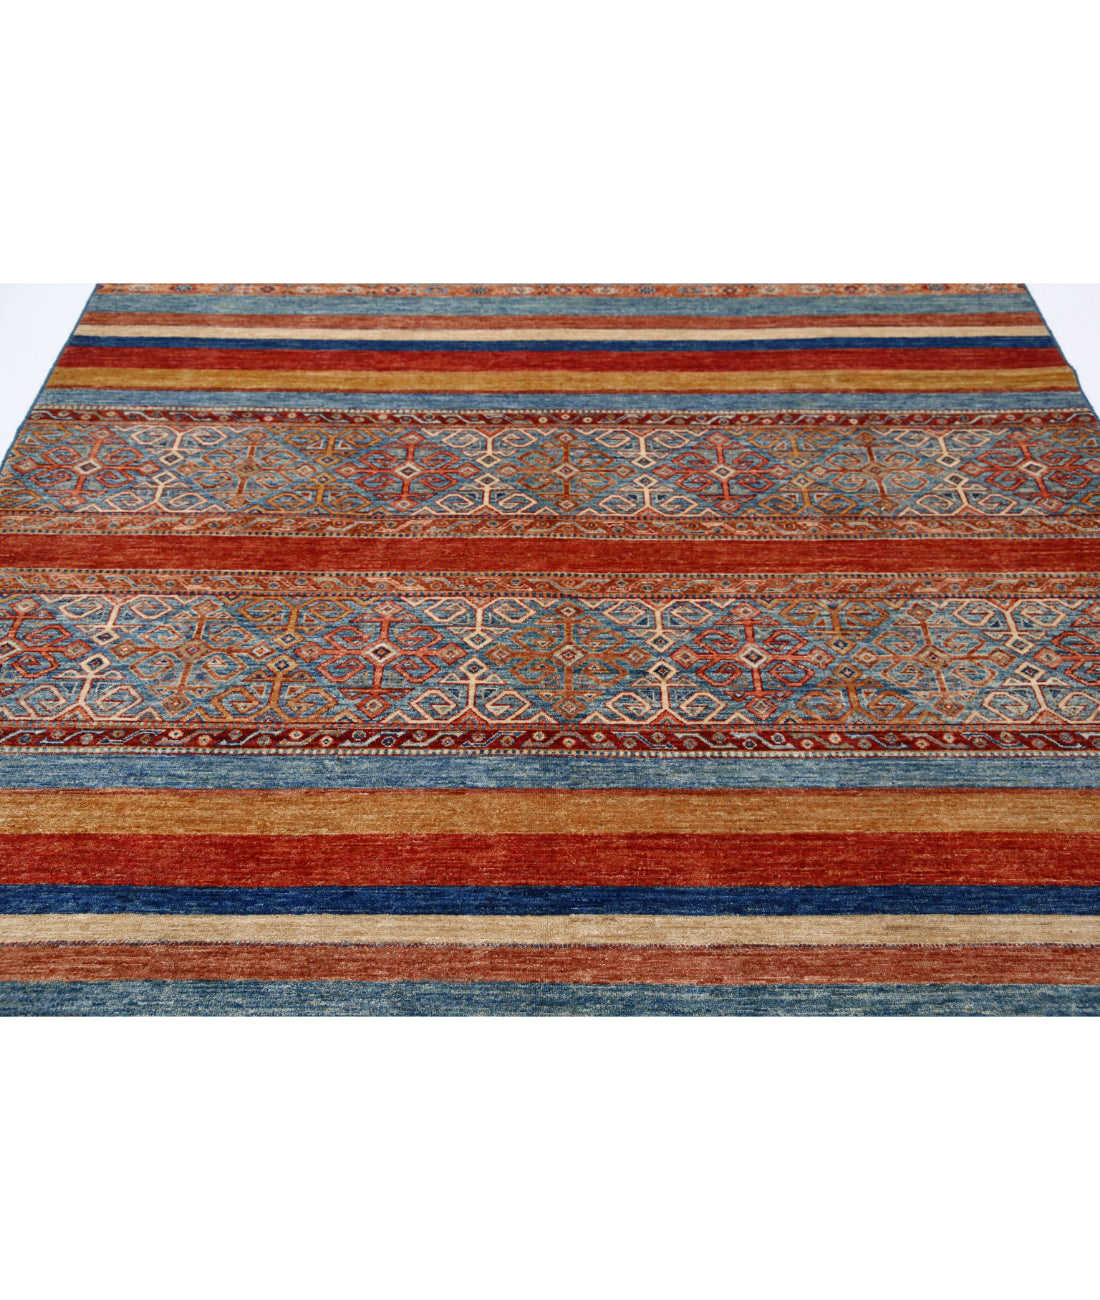 Hand Knotted Khurjeen Wool Rug - 6'9'' x 10'0'' 6'9'' x 10'0'' (203 X 300) / Multi / Multi